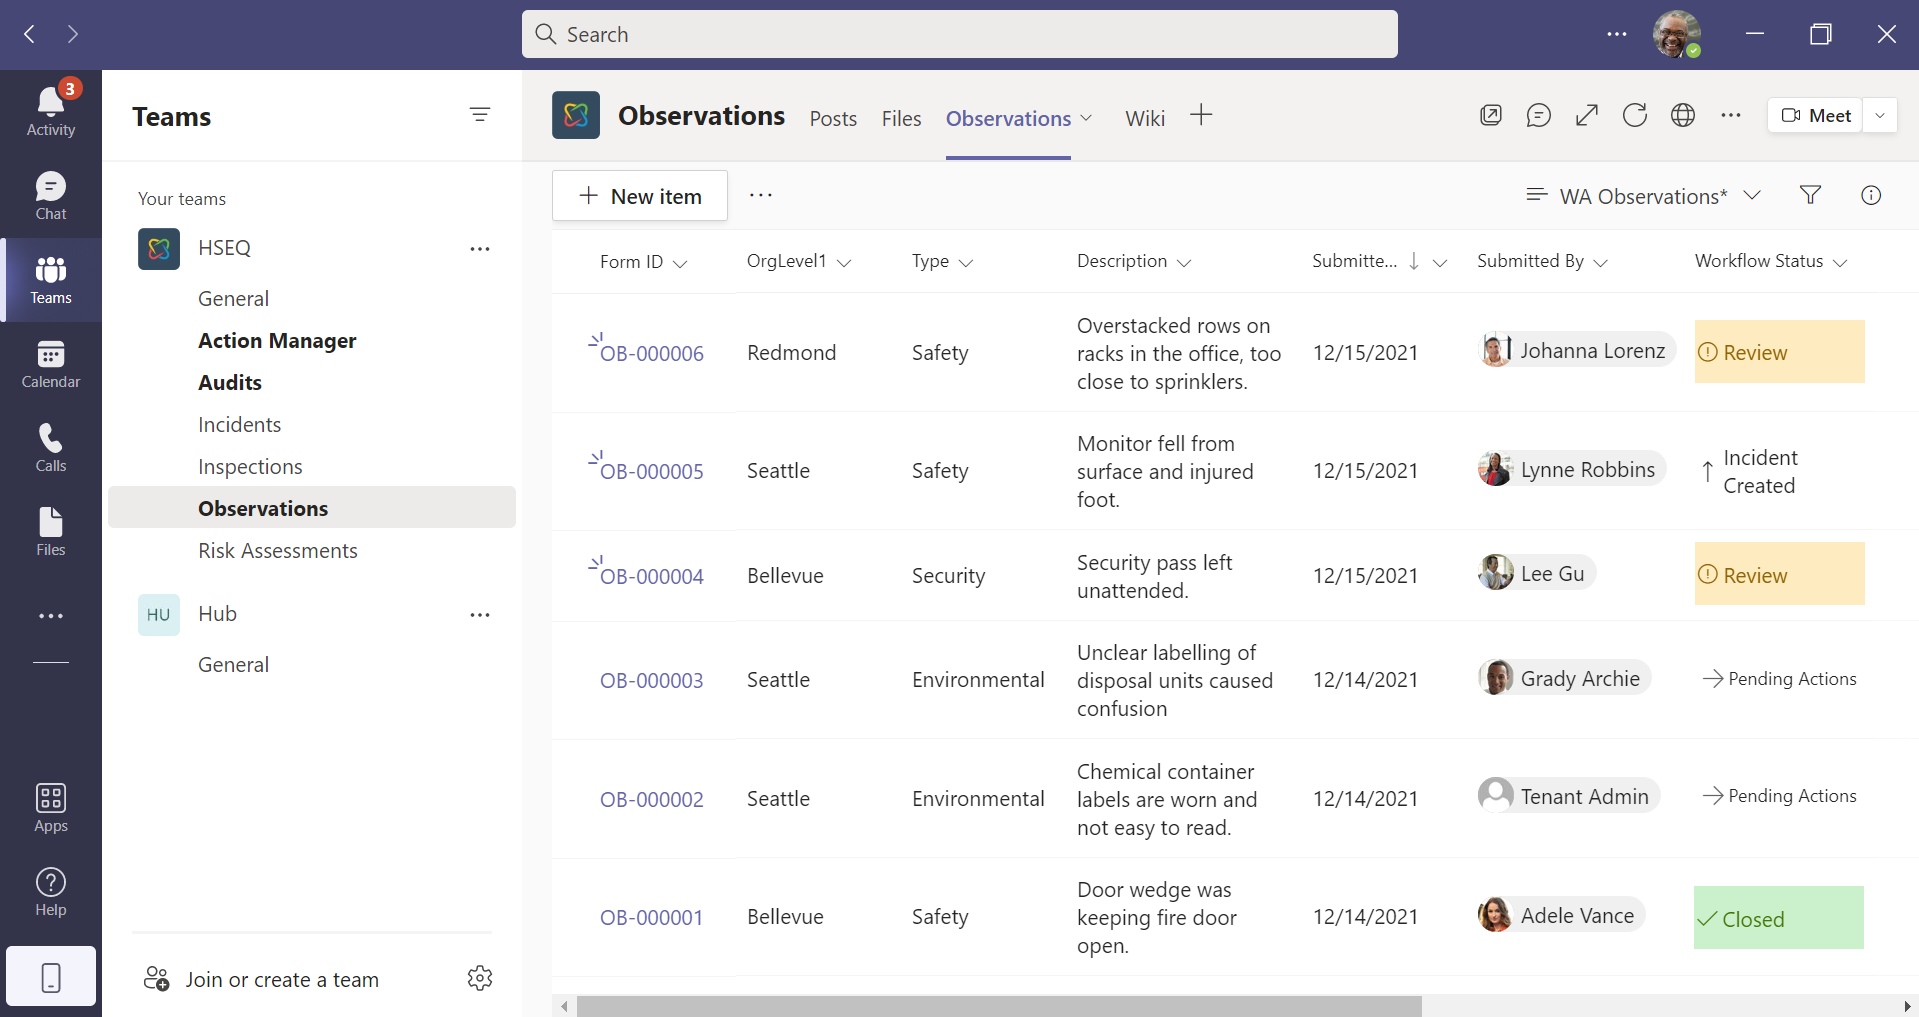 Integrate with Microsoft Teams for employees to easily submit forms like Observations